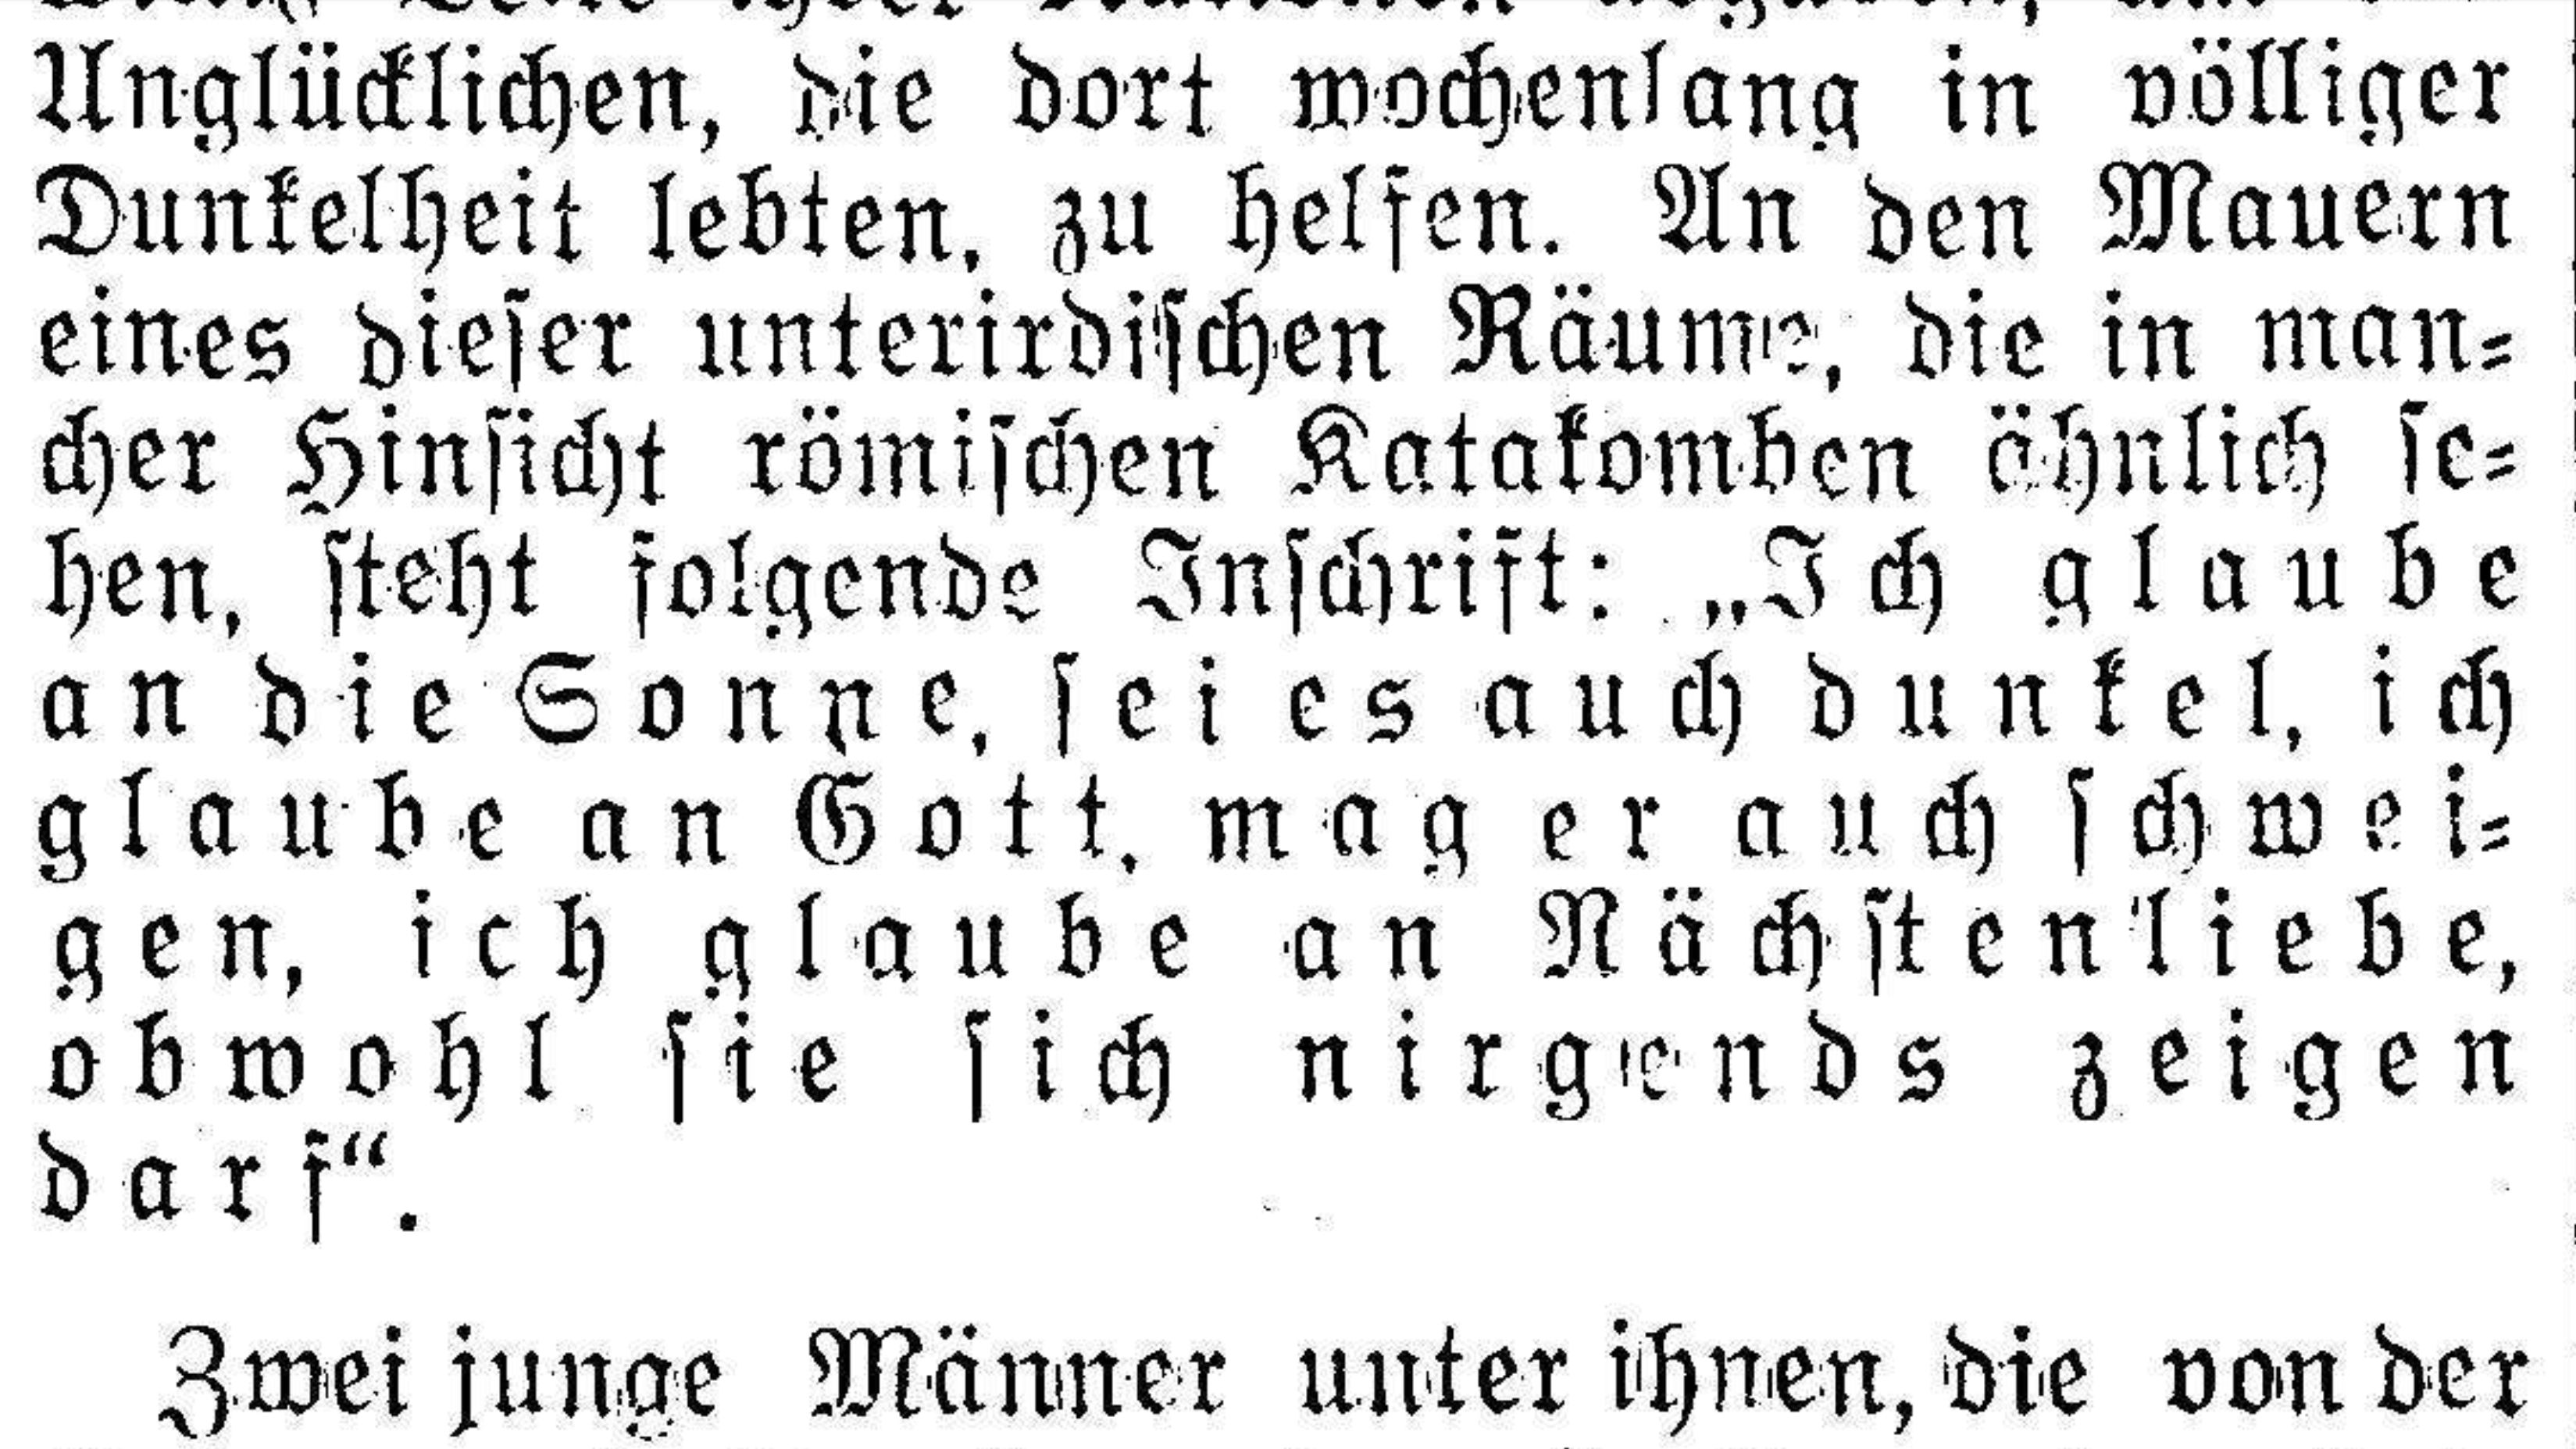 Image of a German language newspaper column, in blackletter text, that includes the "I believe in the sun" quotation.